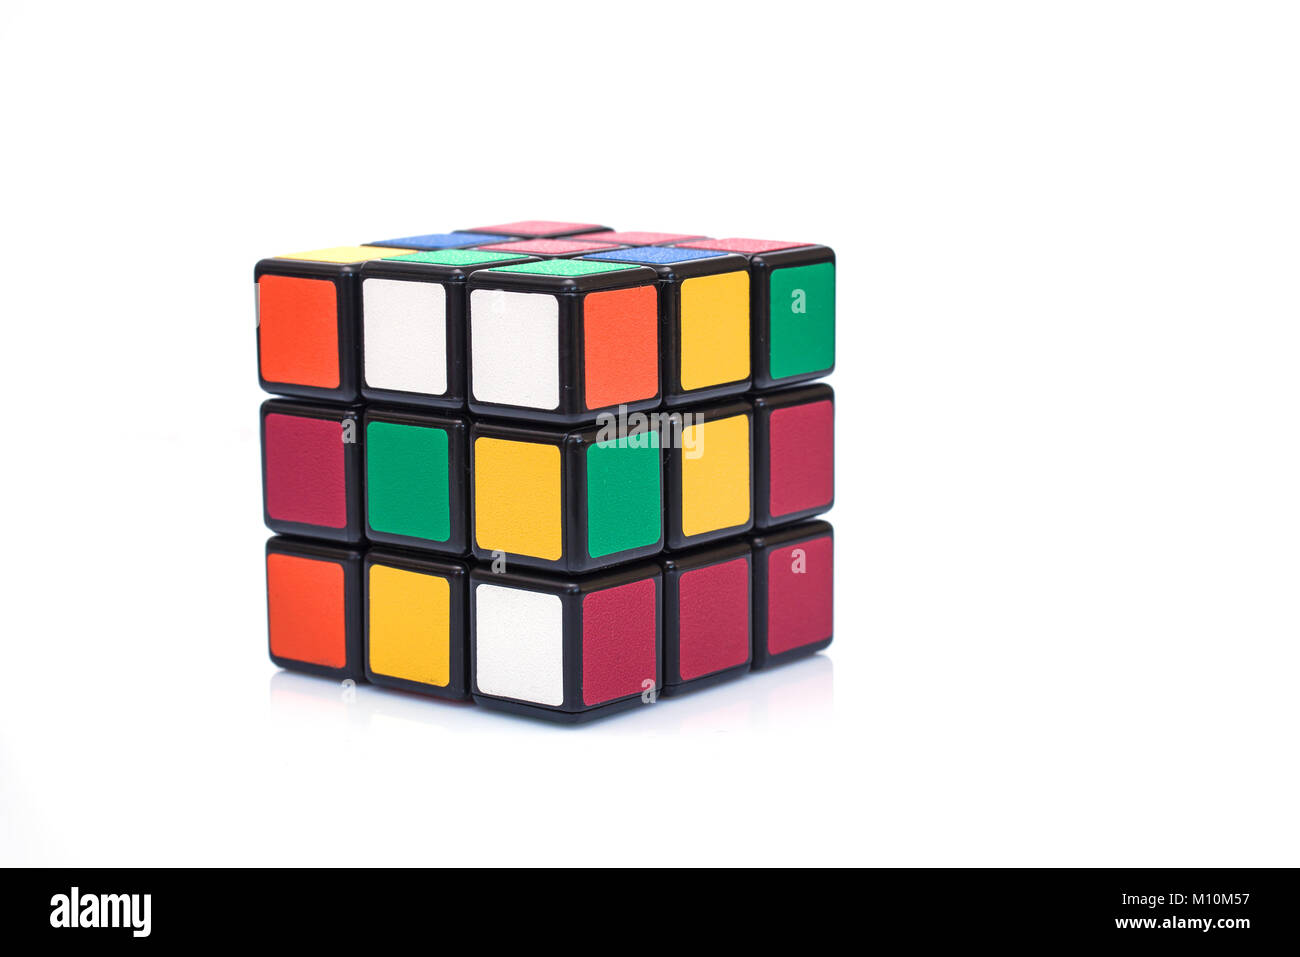 PARIS FRANCE - SEPTEMBER 29, 2015: Rubik's cube on the white background. This famous game was invented by a Hungarian architect Erno Rubik in 1974. Stock Photo